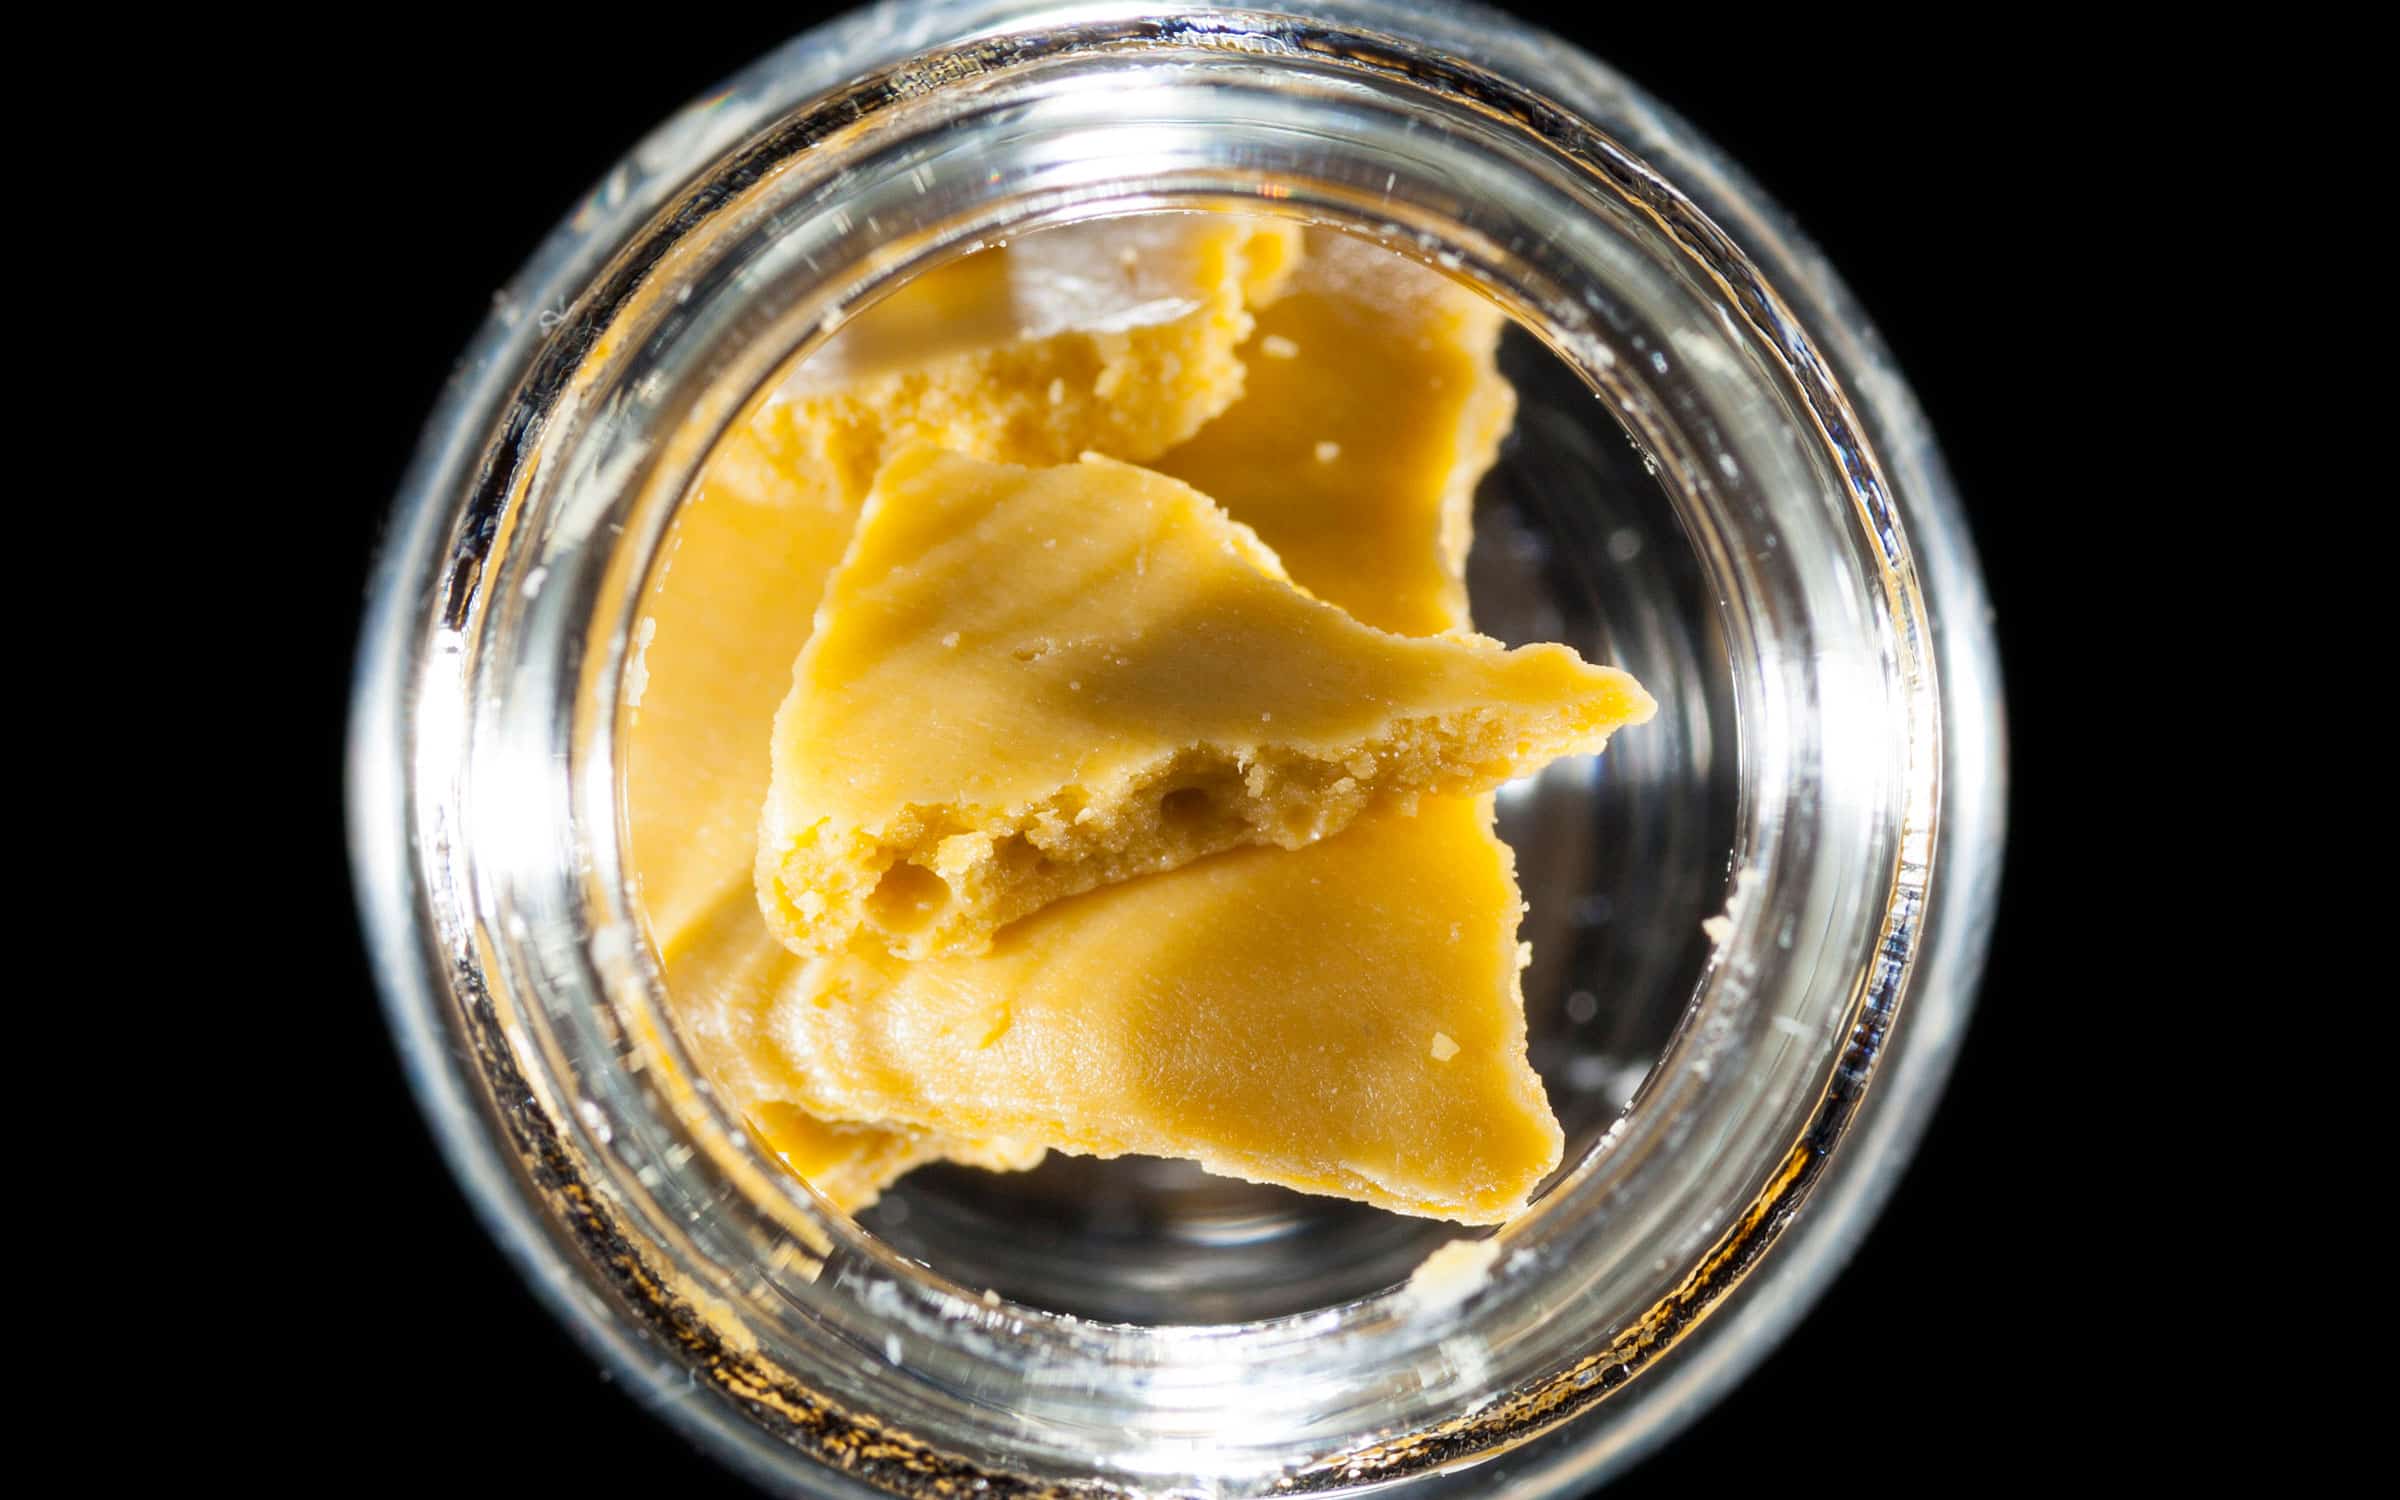 ci38_forbidden_fruit_synergy_cannabis_co_la_kush_and_critical_concentrates